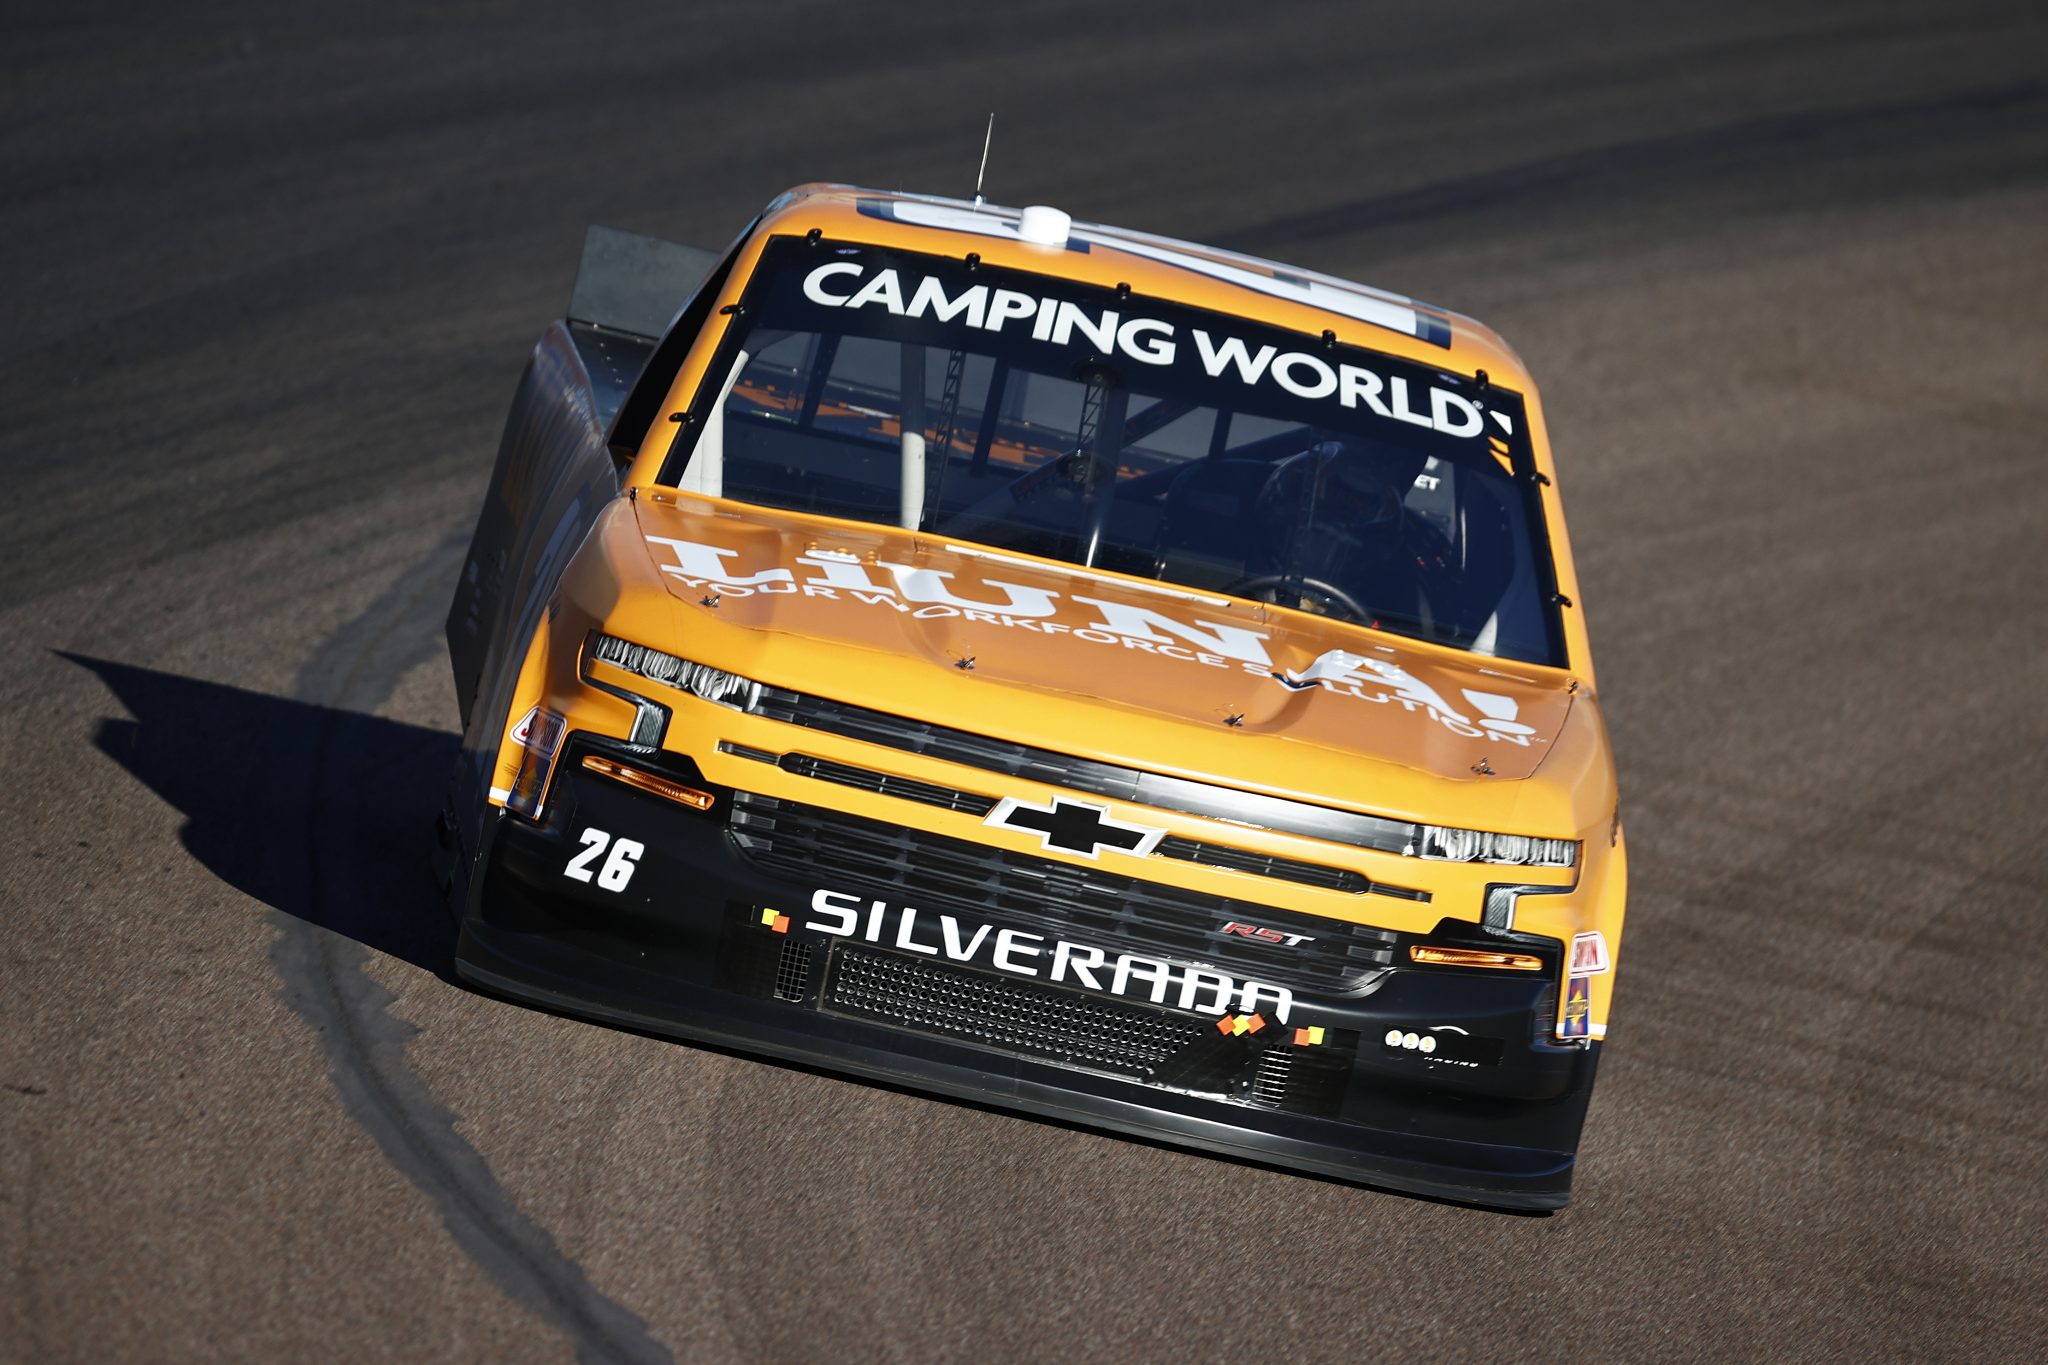 AVONDALE, ARIZONA - NOVEMBER 05: Tyler Ankrum, driver of the #26 LiUNA! Chevrolet, drives during practice for the NASCAR Camping World Truck Series Lucas Oil 150 at Phoenix Raceway on November 05, 2021 in Avondale, Arizona. (Photo by Jared C. Tilton/Getty Images) | Getty Images